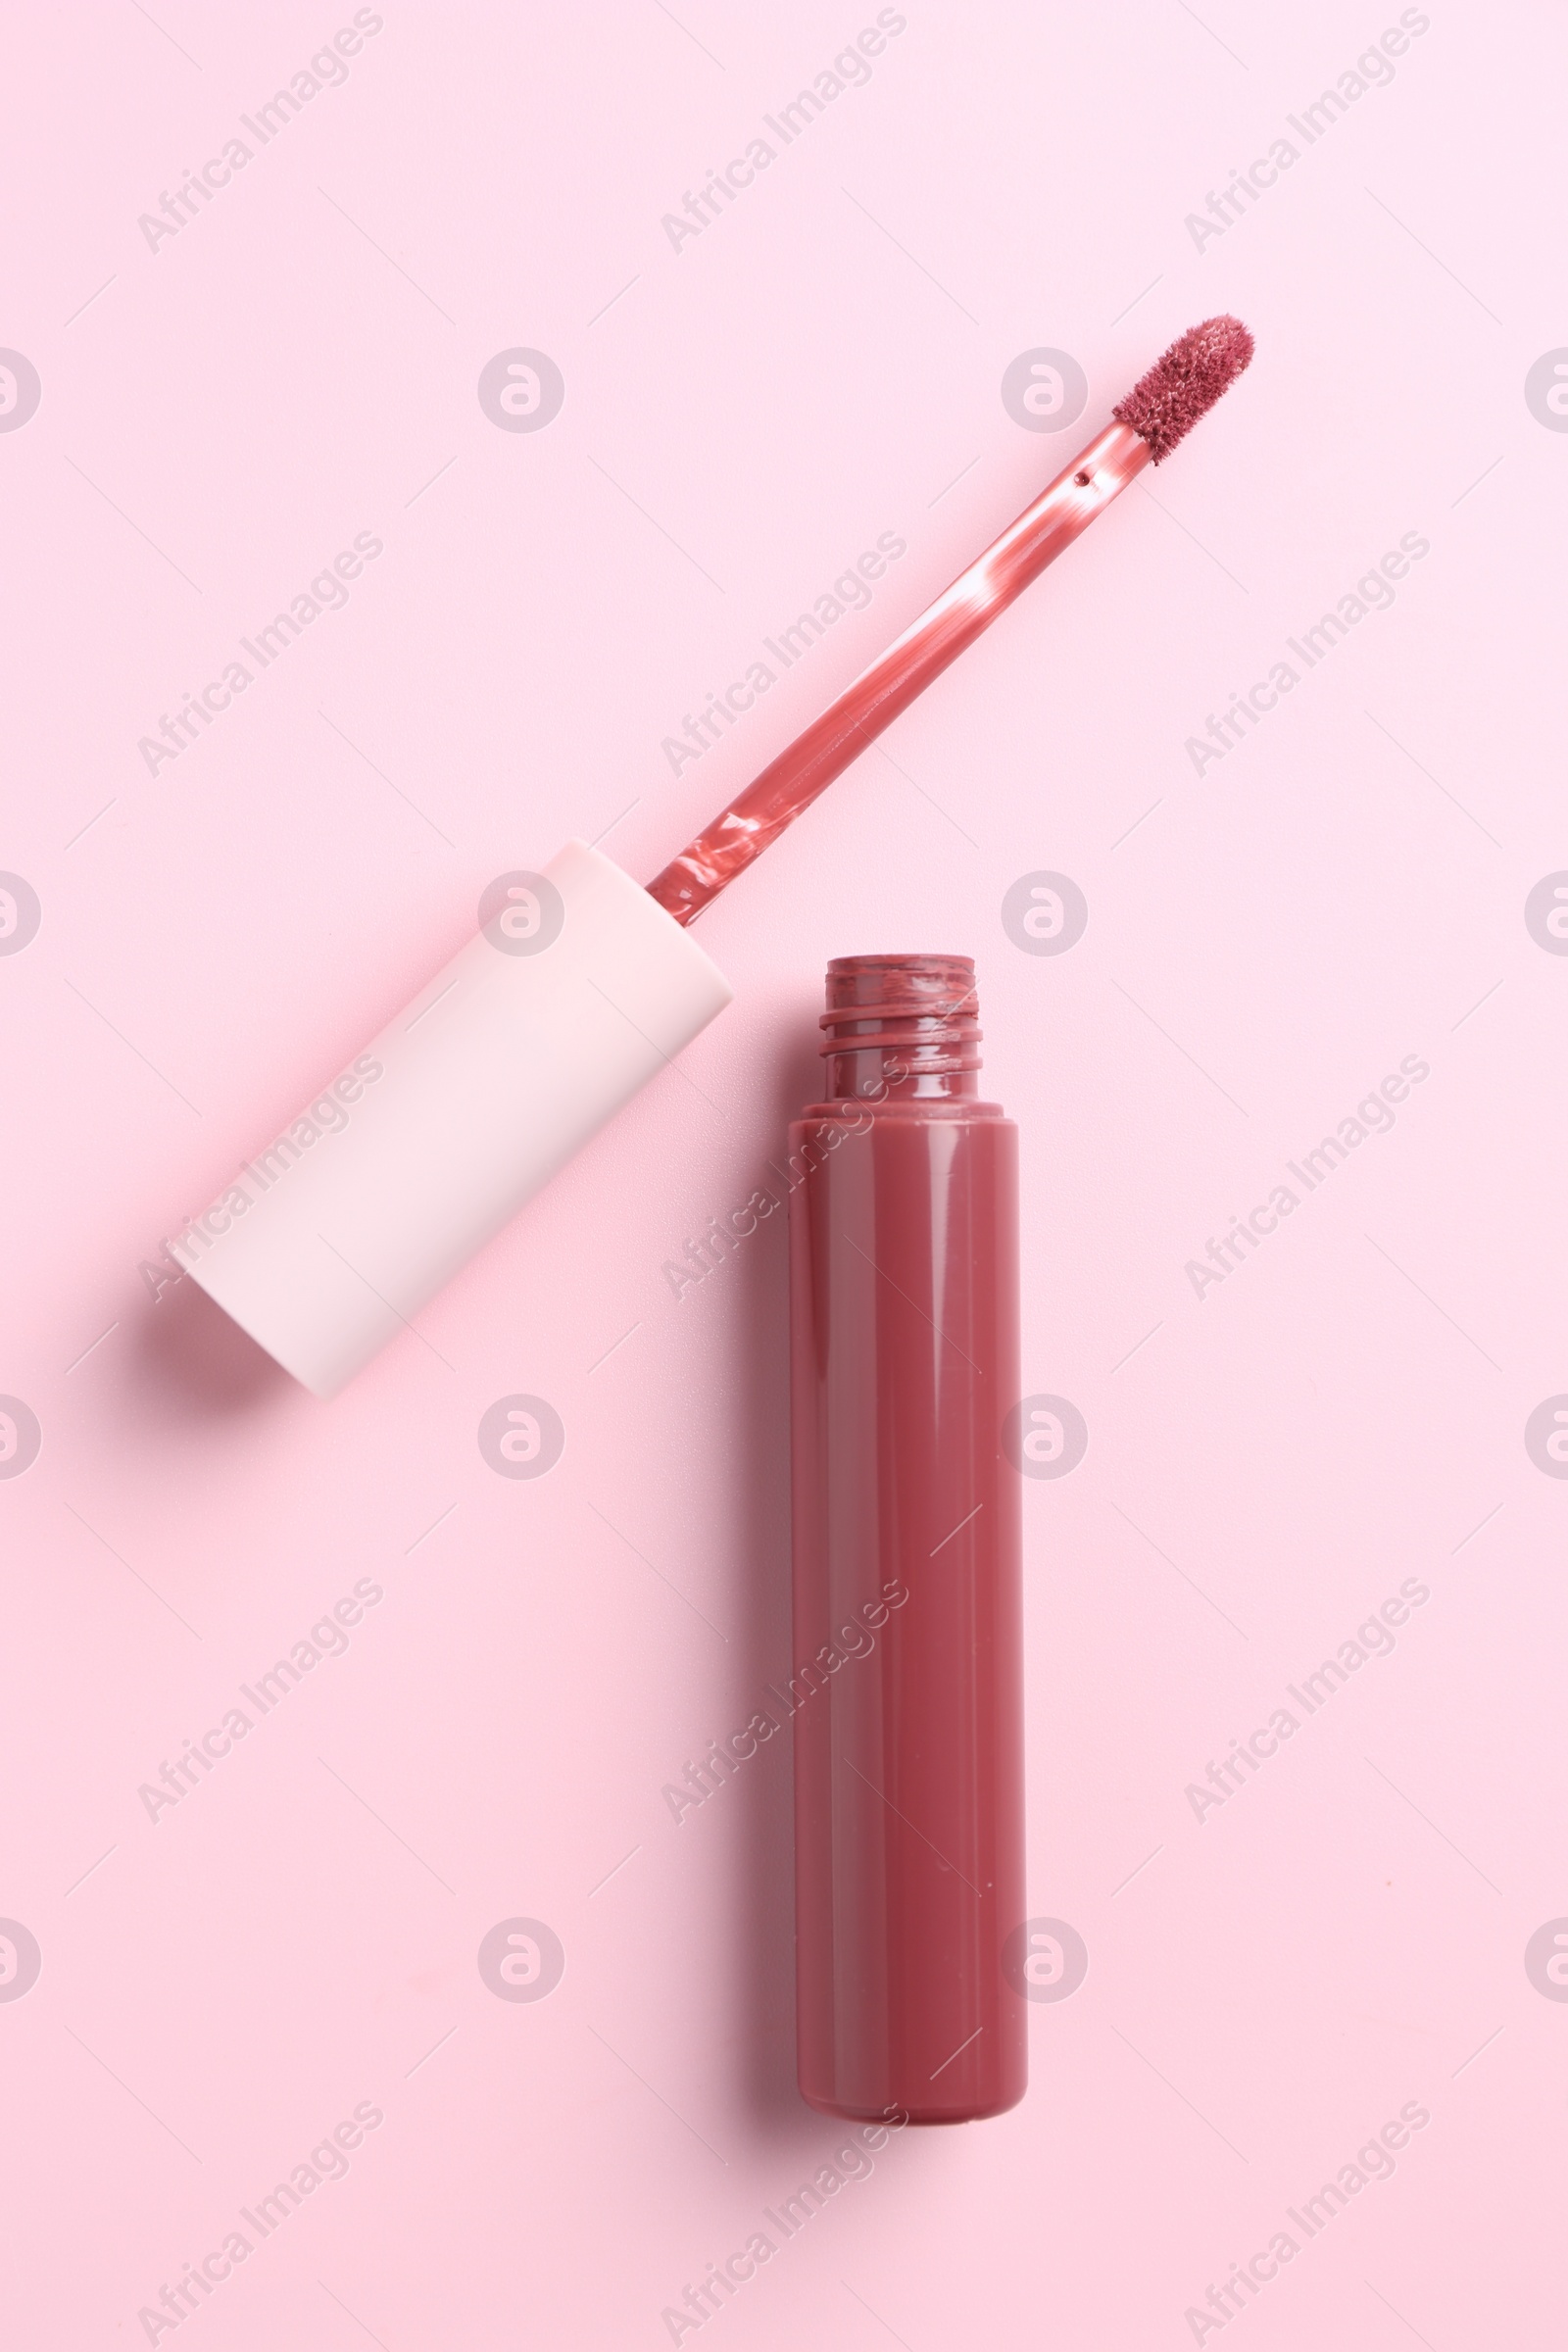 Photo of Bright lip gloss and applicator on pink background, top view